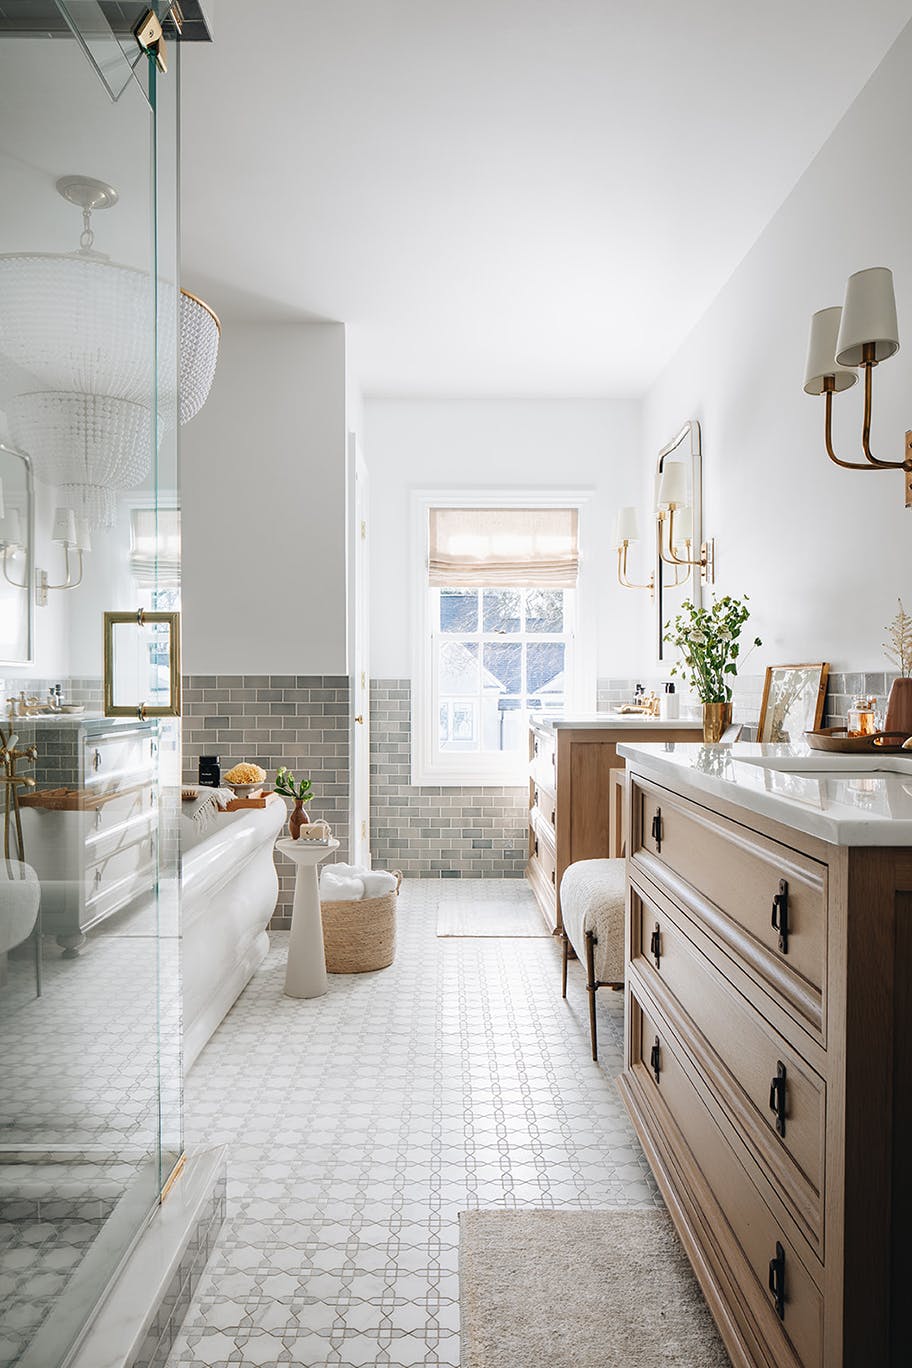 Nicole-Green-Design-Project-Chevy-Chase-Historic-East-Coast-Home-Main-Bathroom